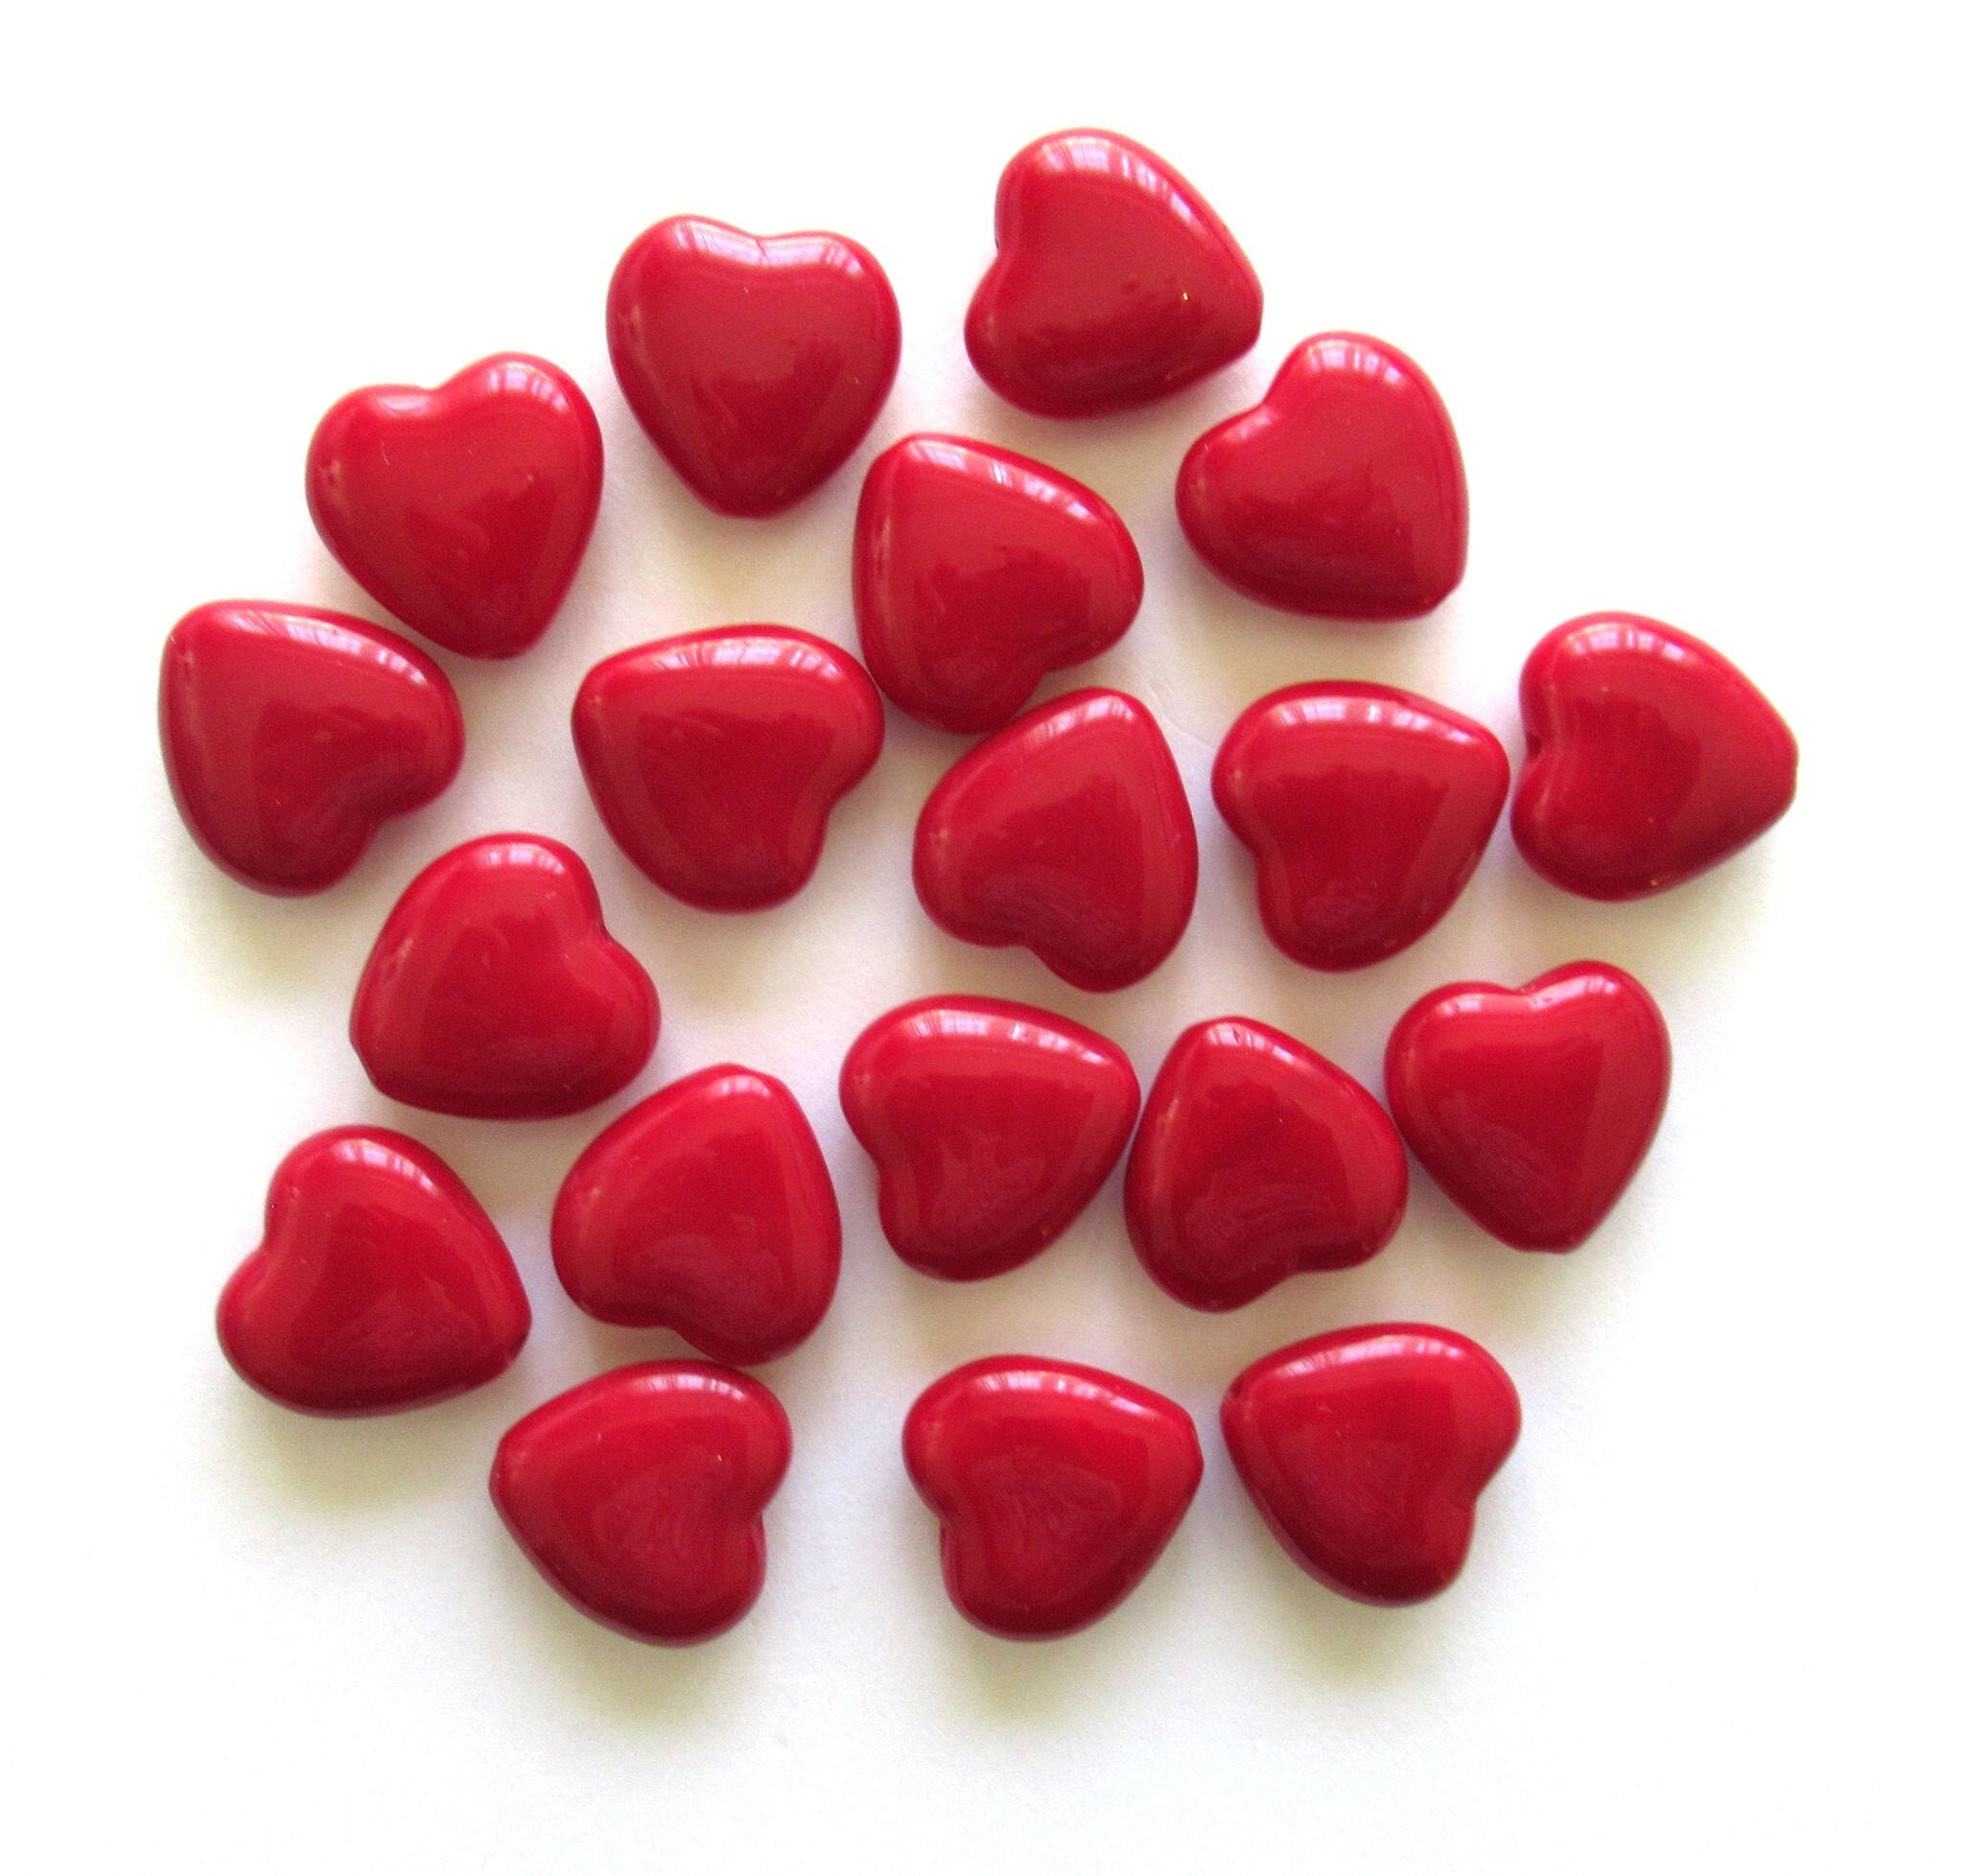 Lot of 6 Czech glass large heart beads - 16 x 15mm opaque red